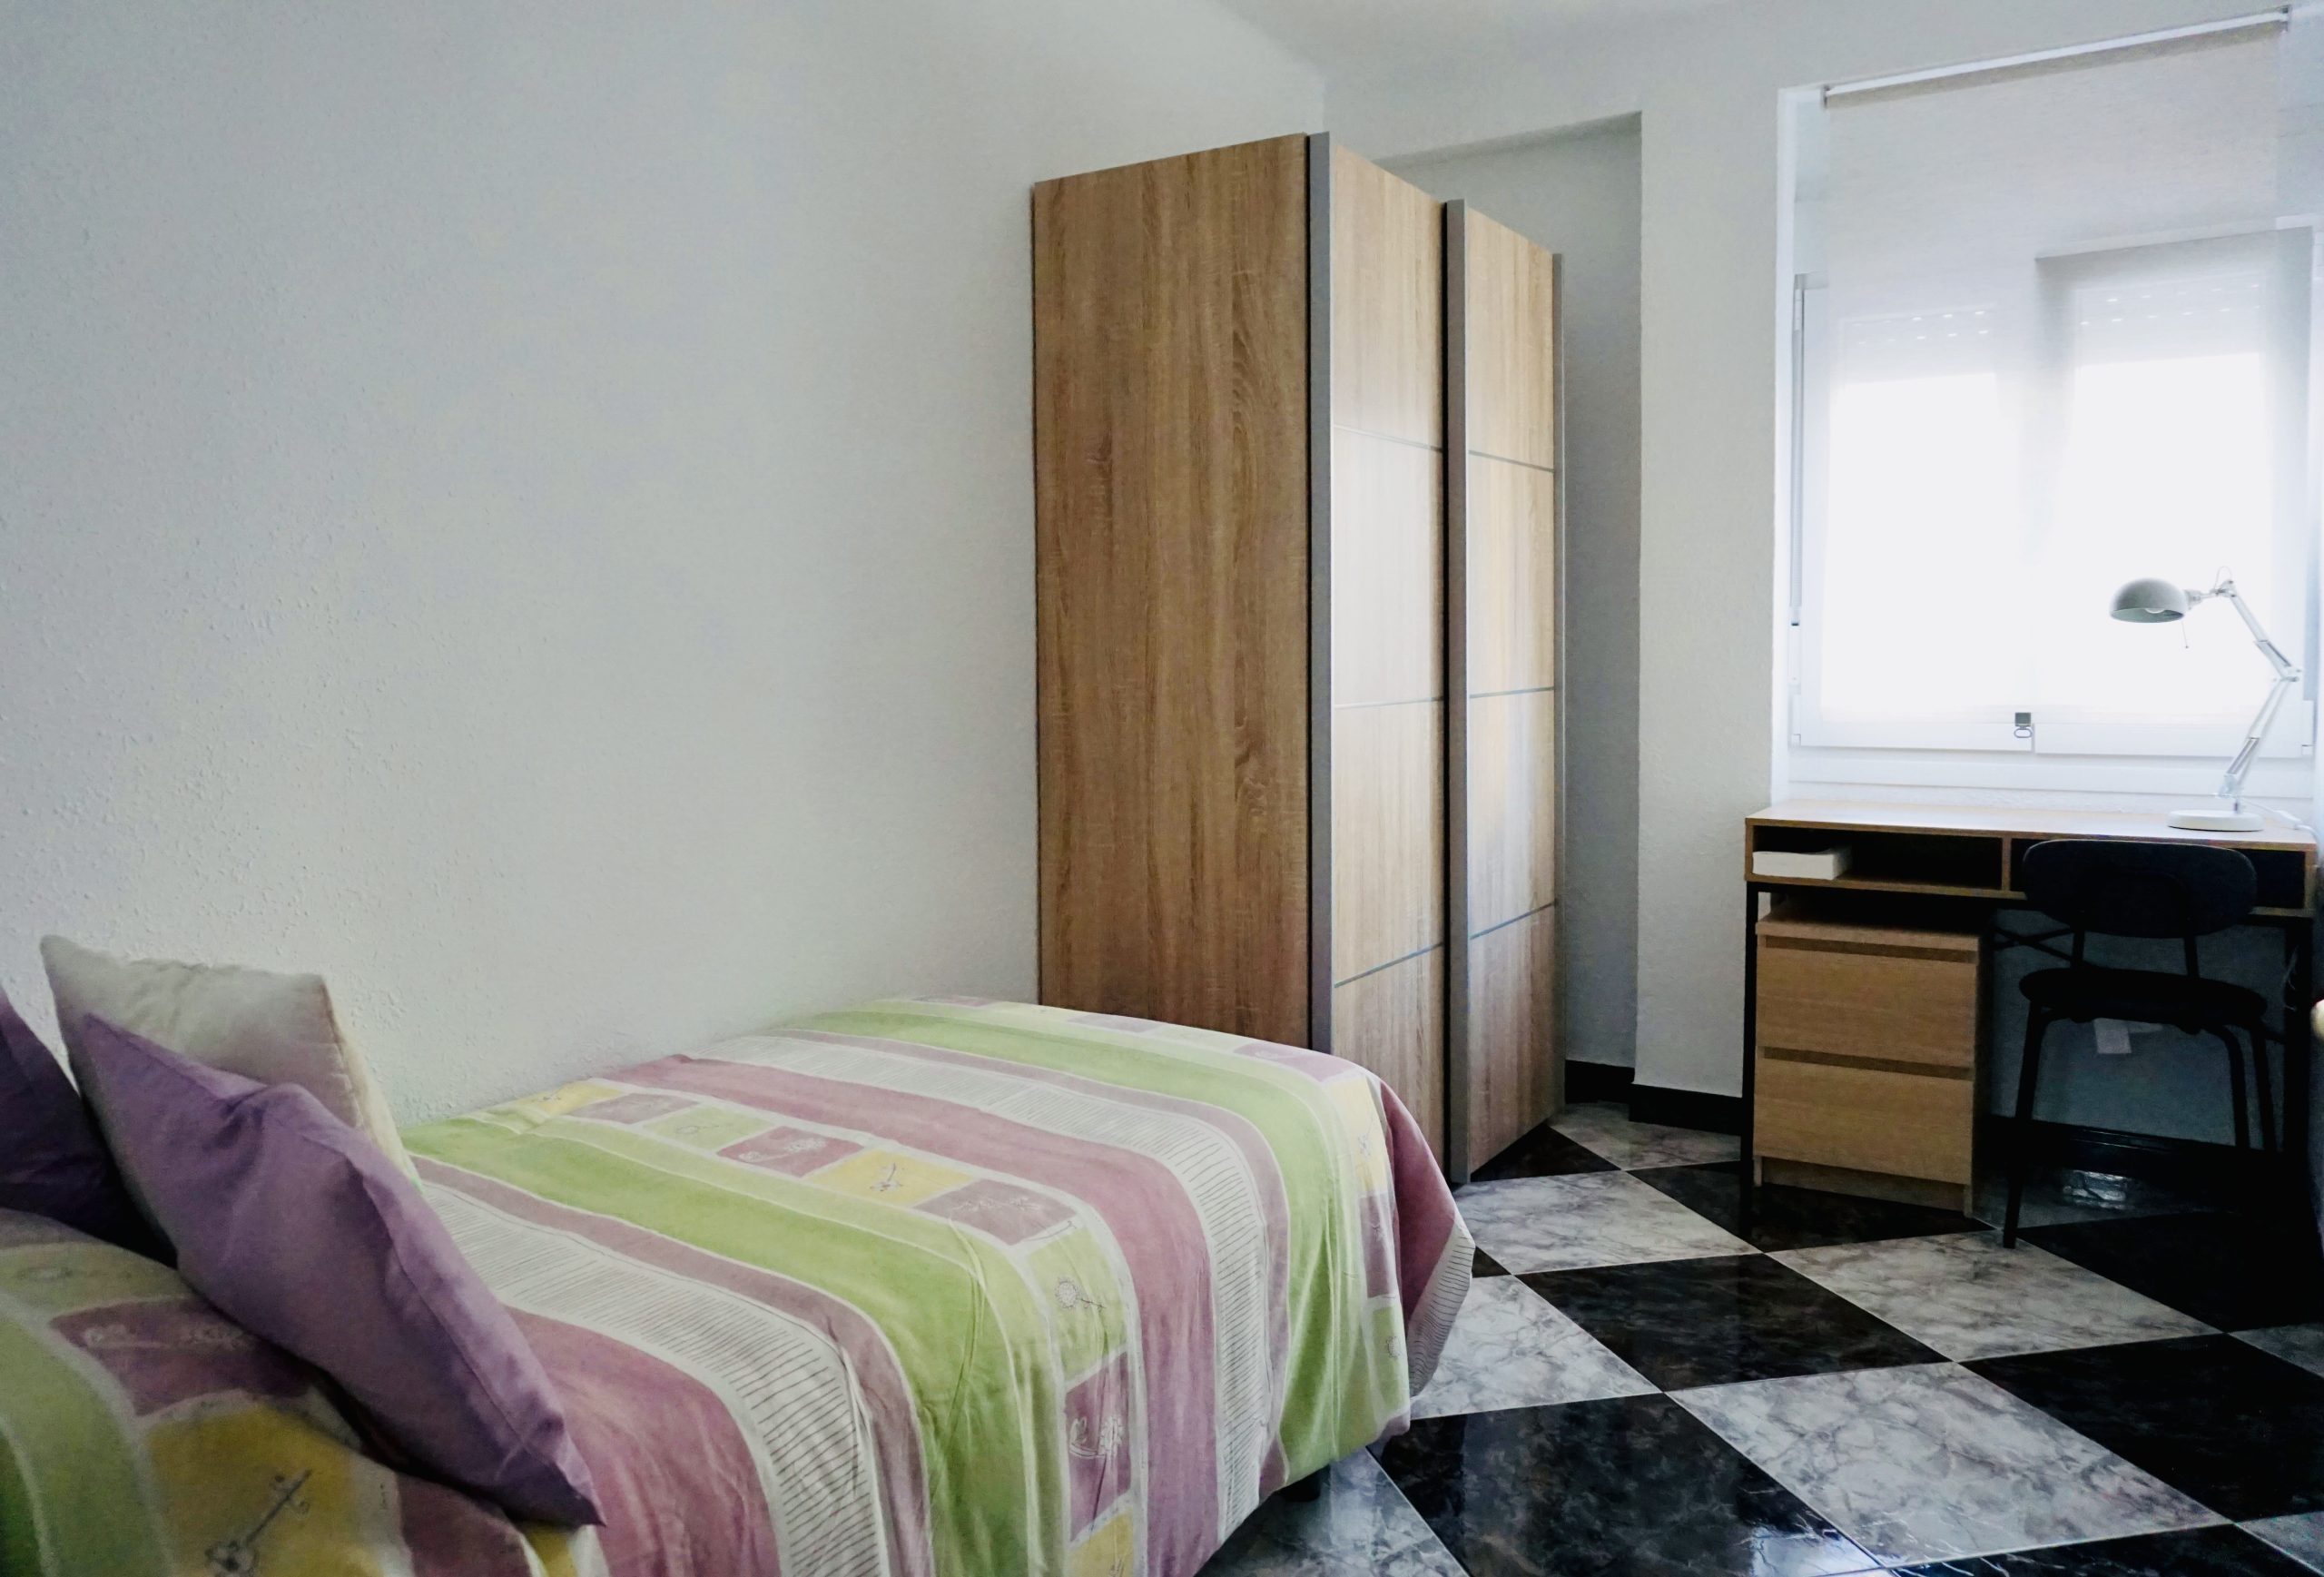 apartment for rent in Malaga - bedroom